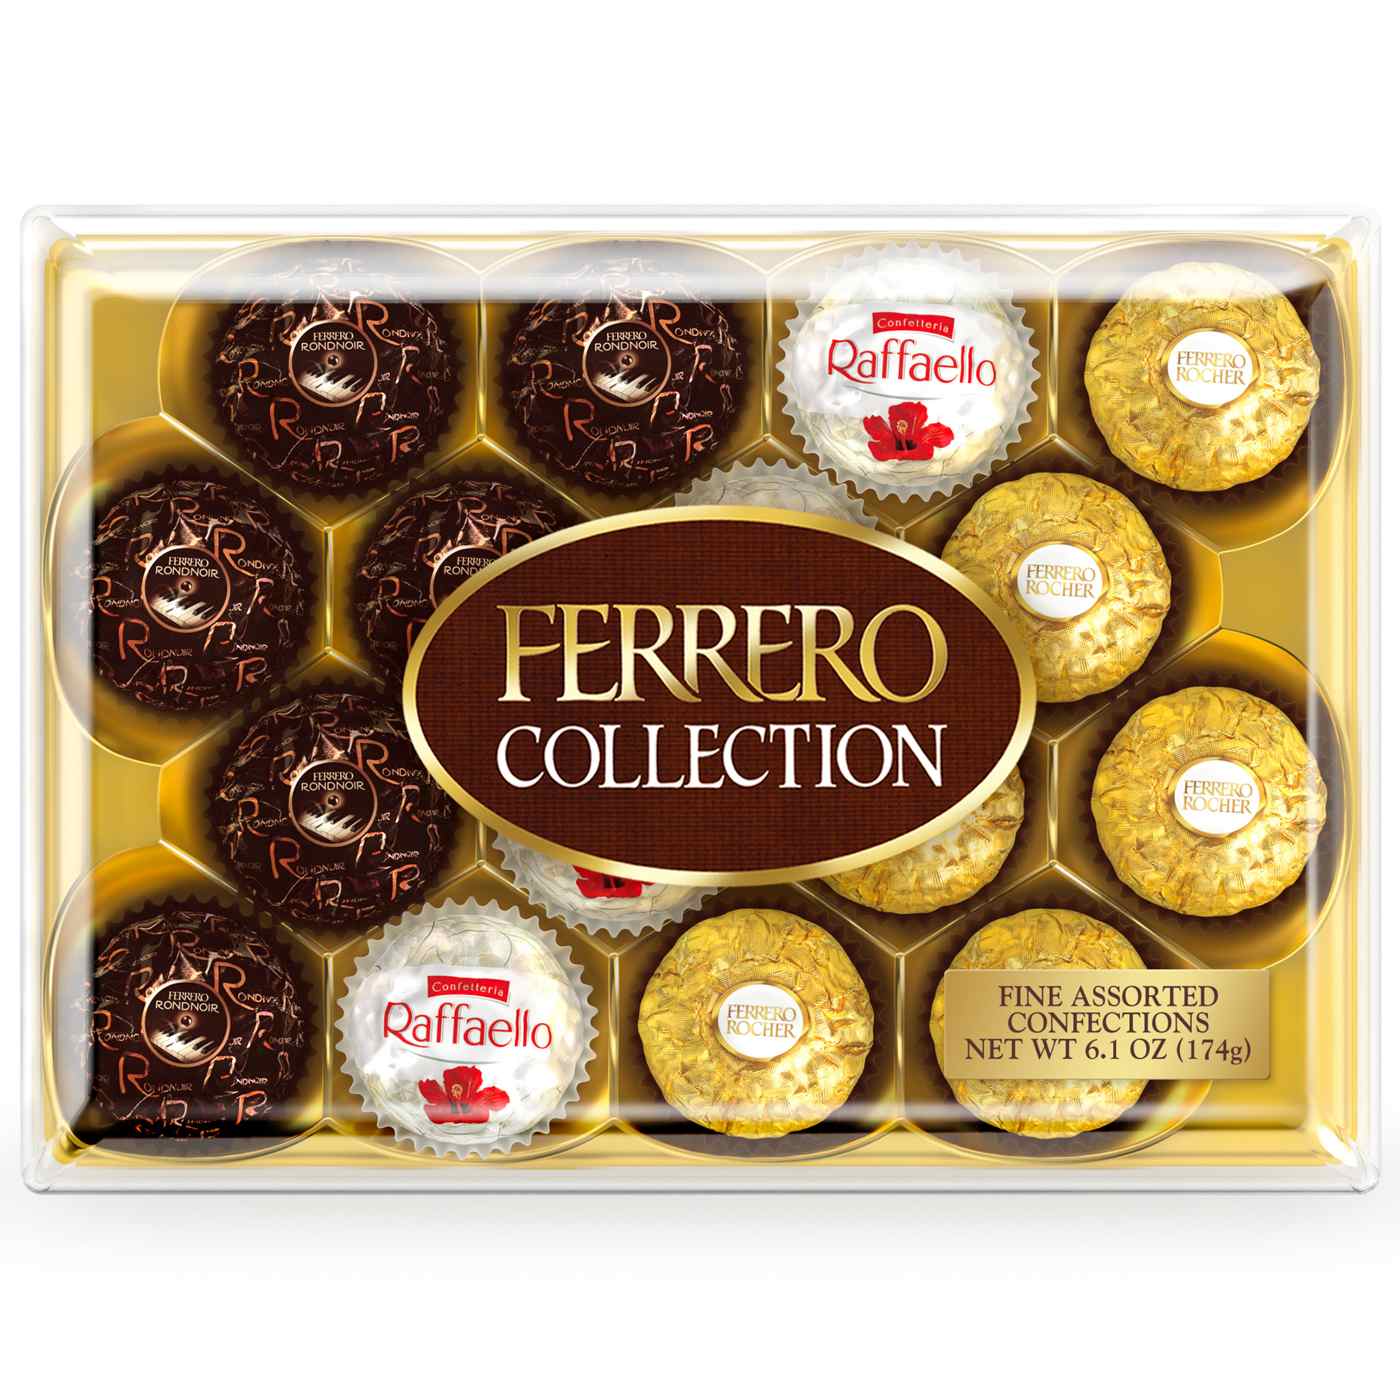 Ferrero Collection Fine Assorted Confections Gift Box - 16 Pc; image 1 of 4